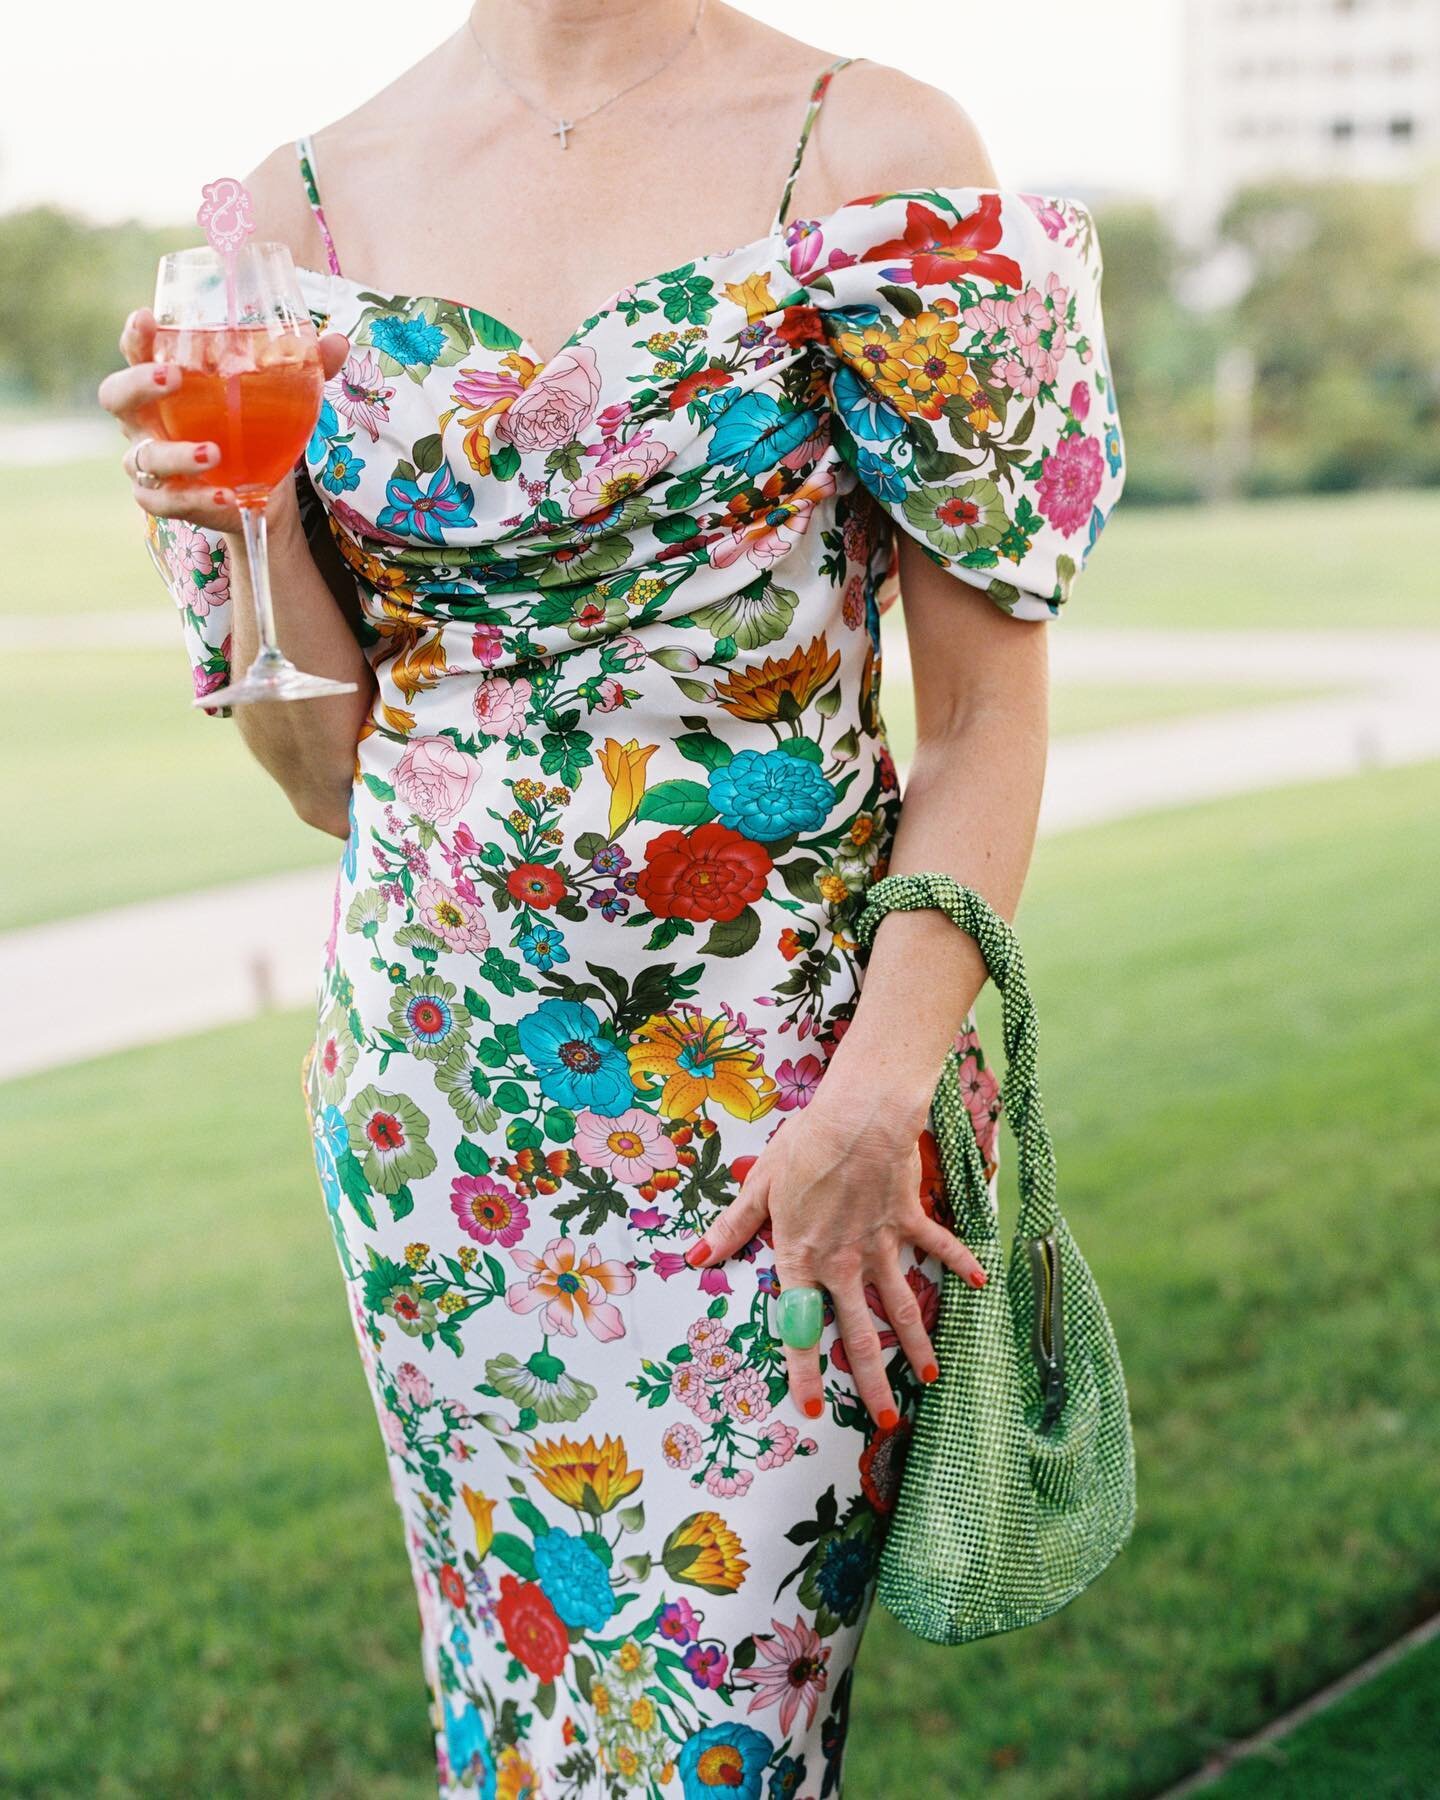 More 🎞️ from the gorgeous @eva.cozart San Antonio wedding!

Captured by the talented 📸 @sarahlordphoto 

Wedding - Custom Silk Flower Print Dress
Rehearsal Dinner -The Savannah Dress @pearlsoutherncouture